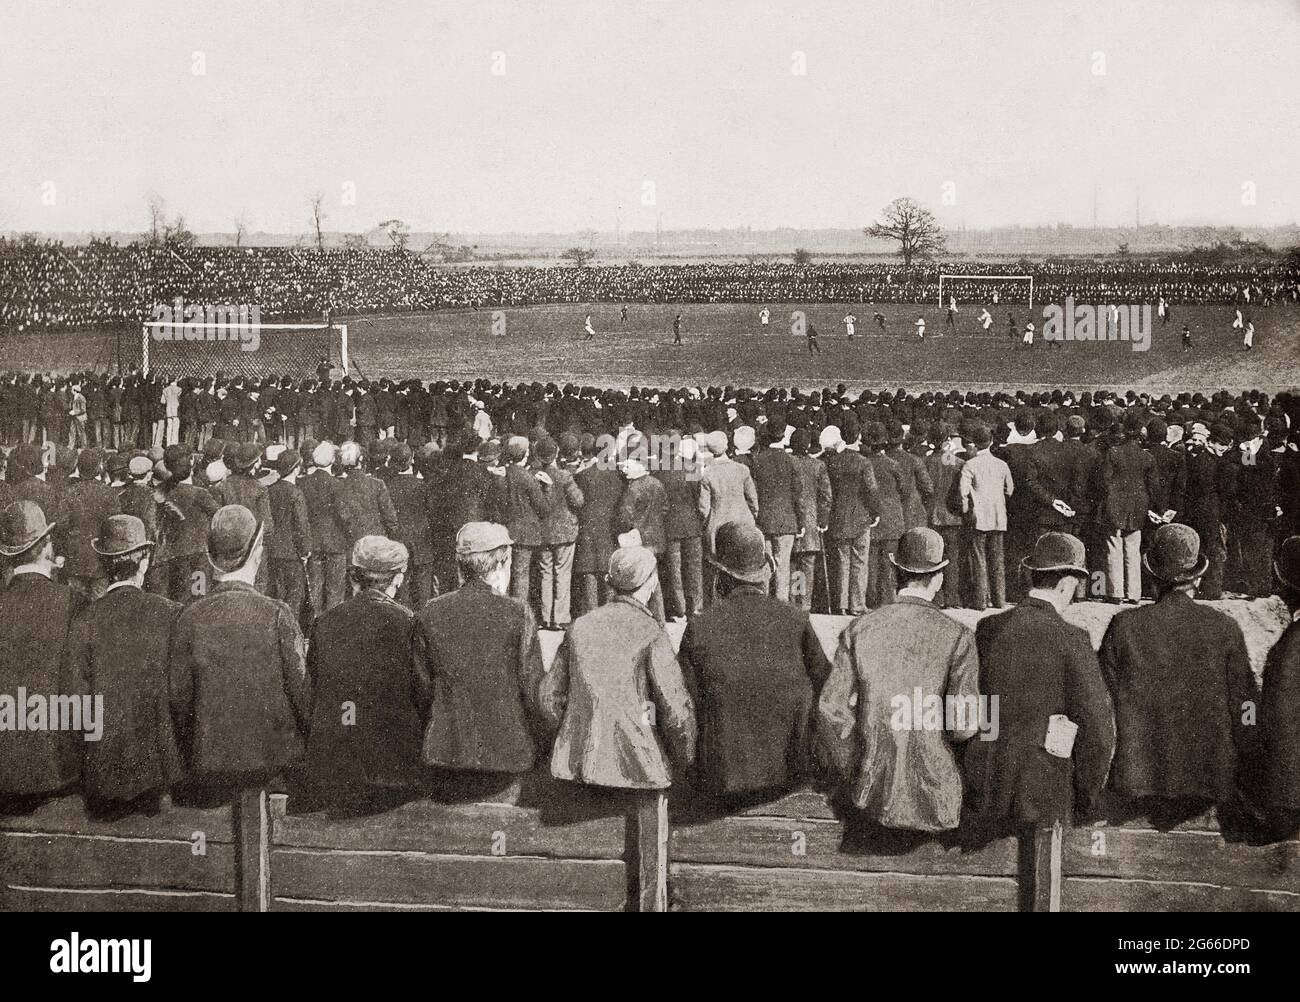 A late 19th century view of spectators (all wearing headgear) at a football match at the Fallowfield Ground in Manchester, England between Everton and Wolverhampton Wanderers. Stock Photo